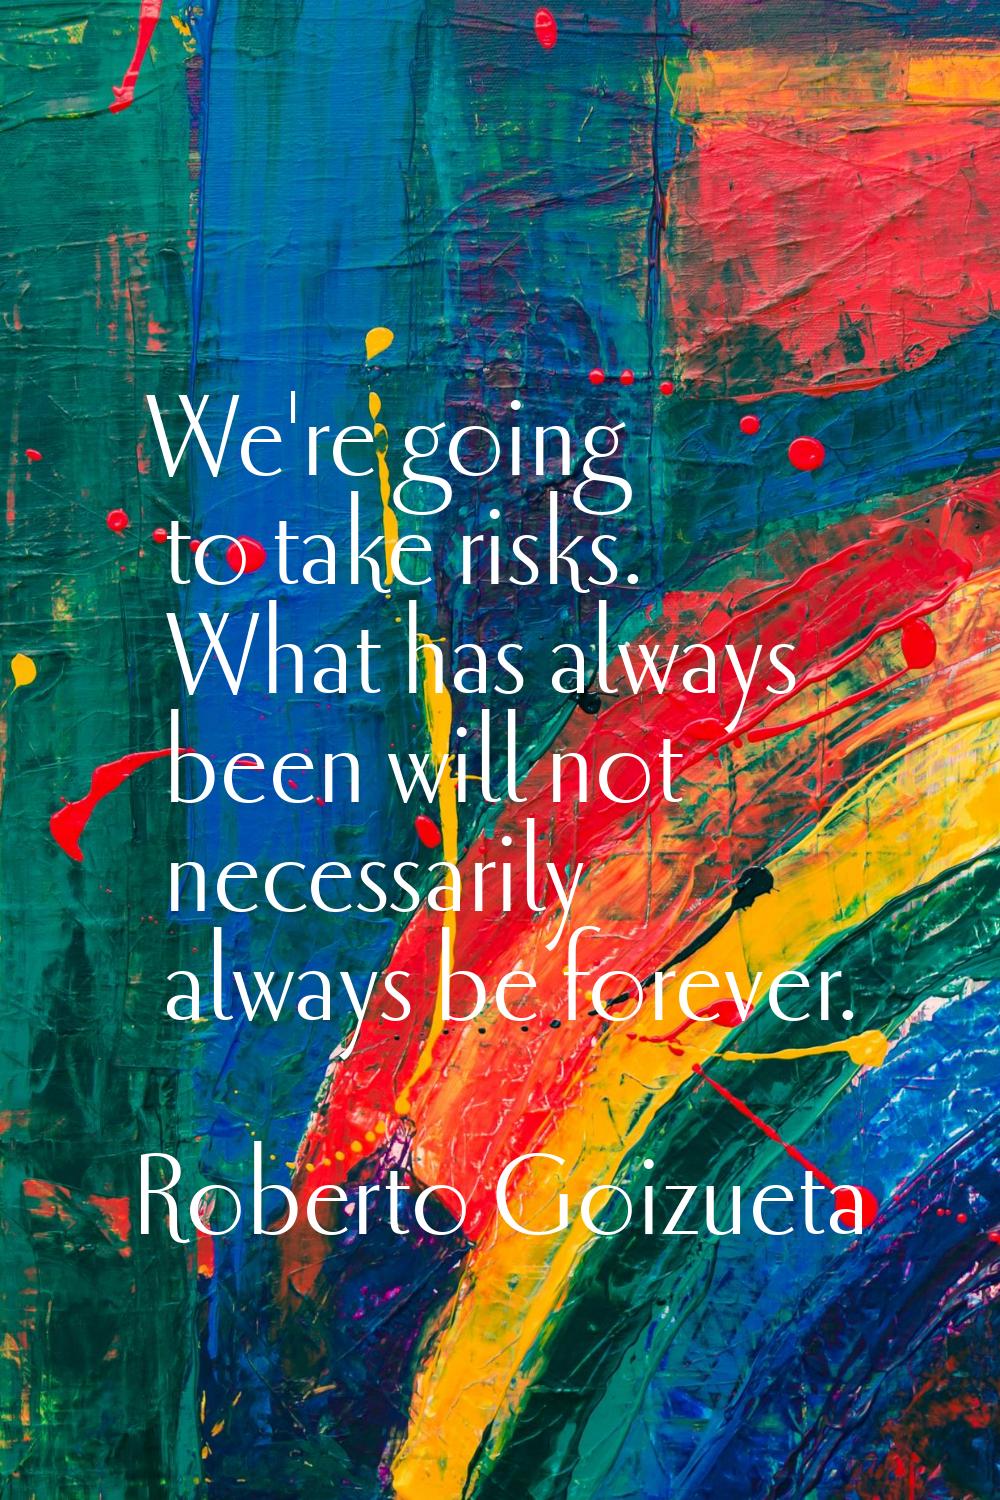 We're going to take risks. What has always been will not necessarily always be forever.